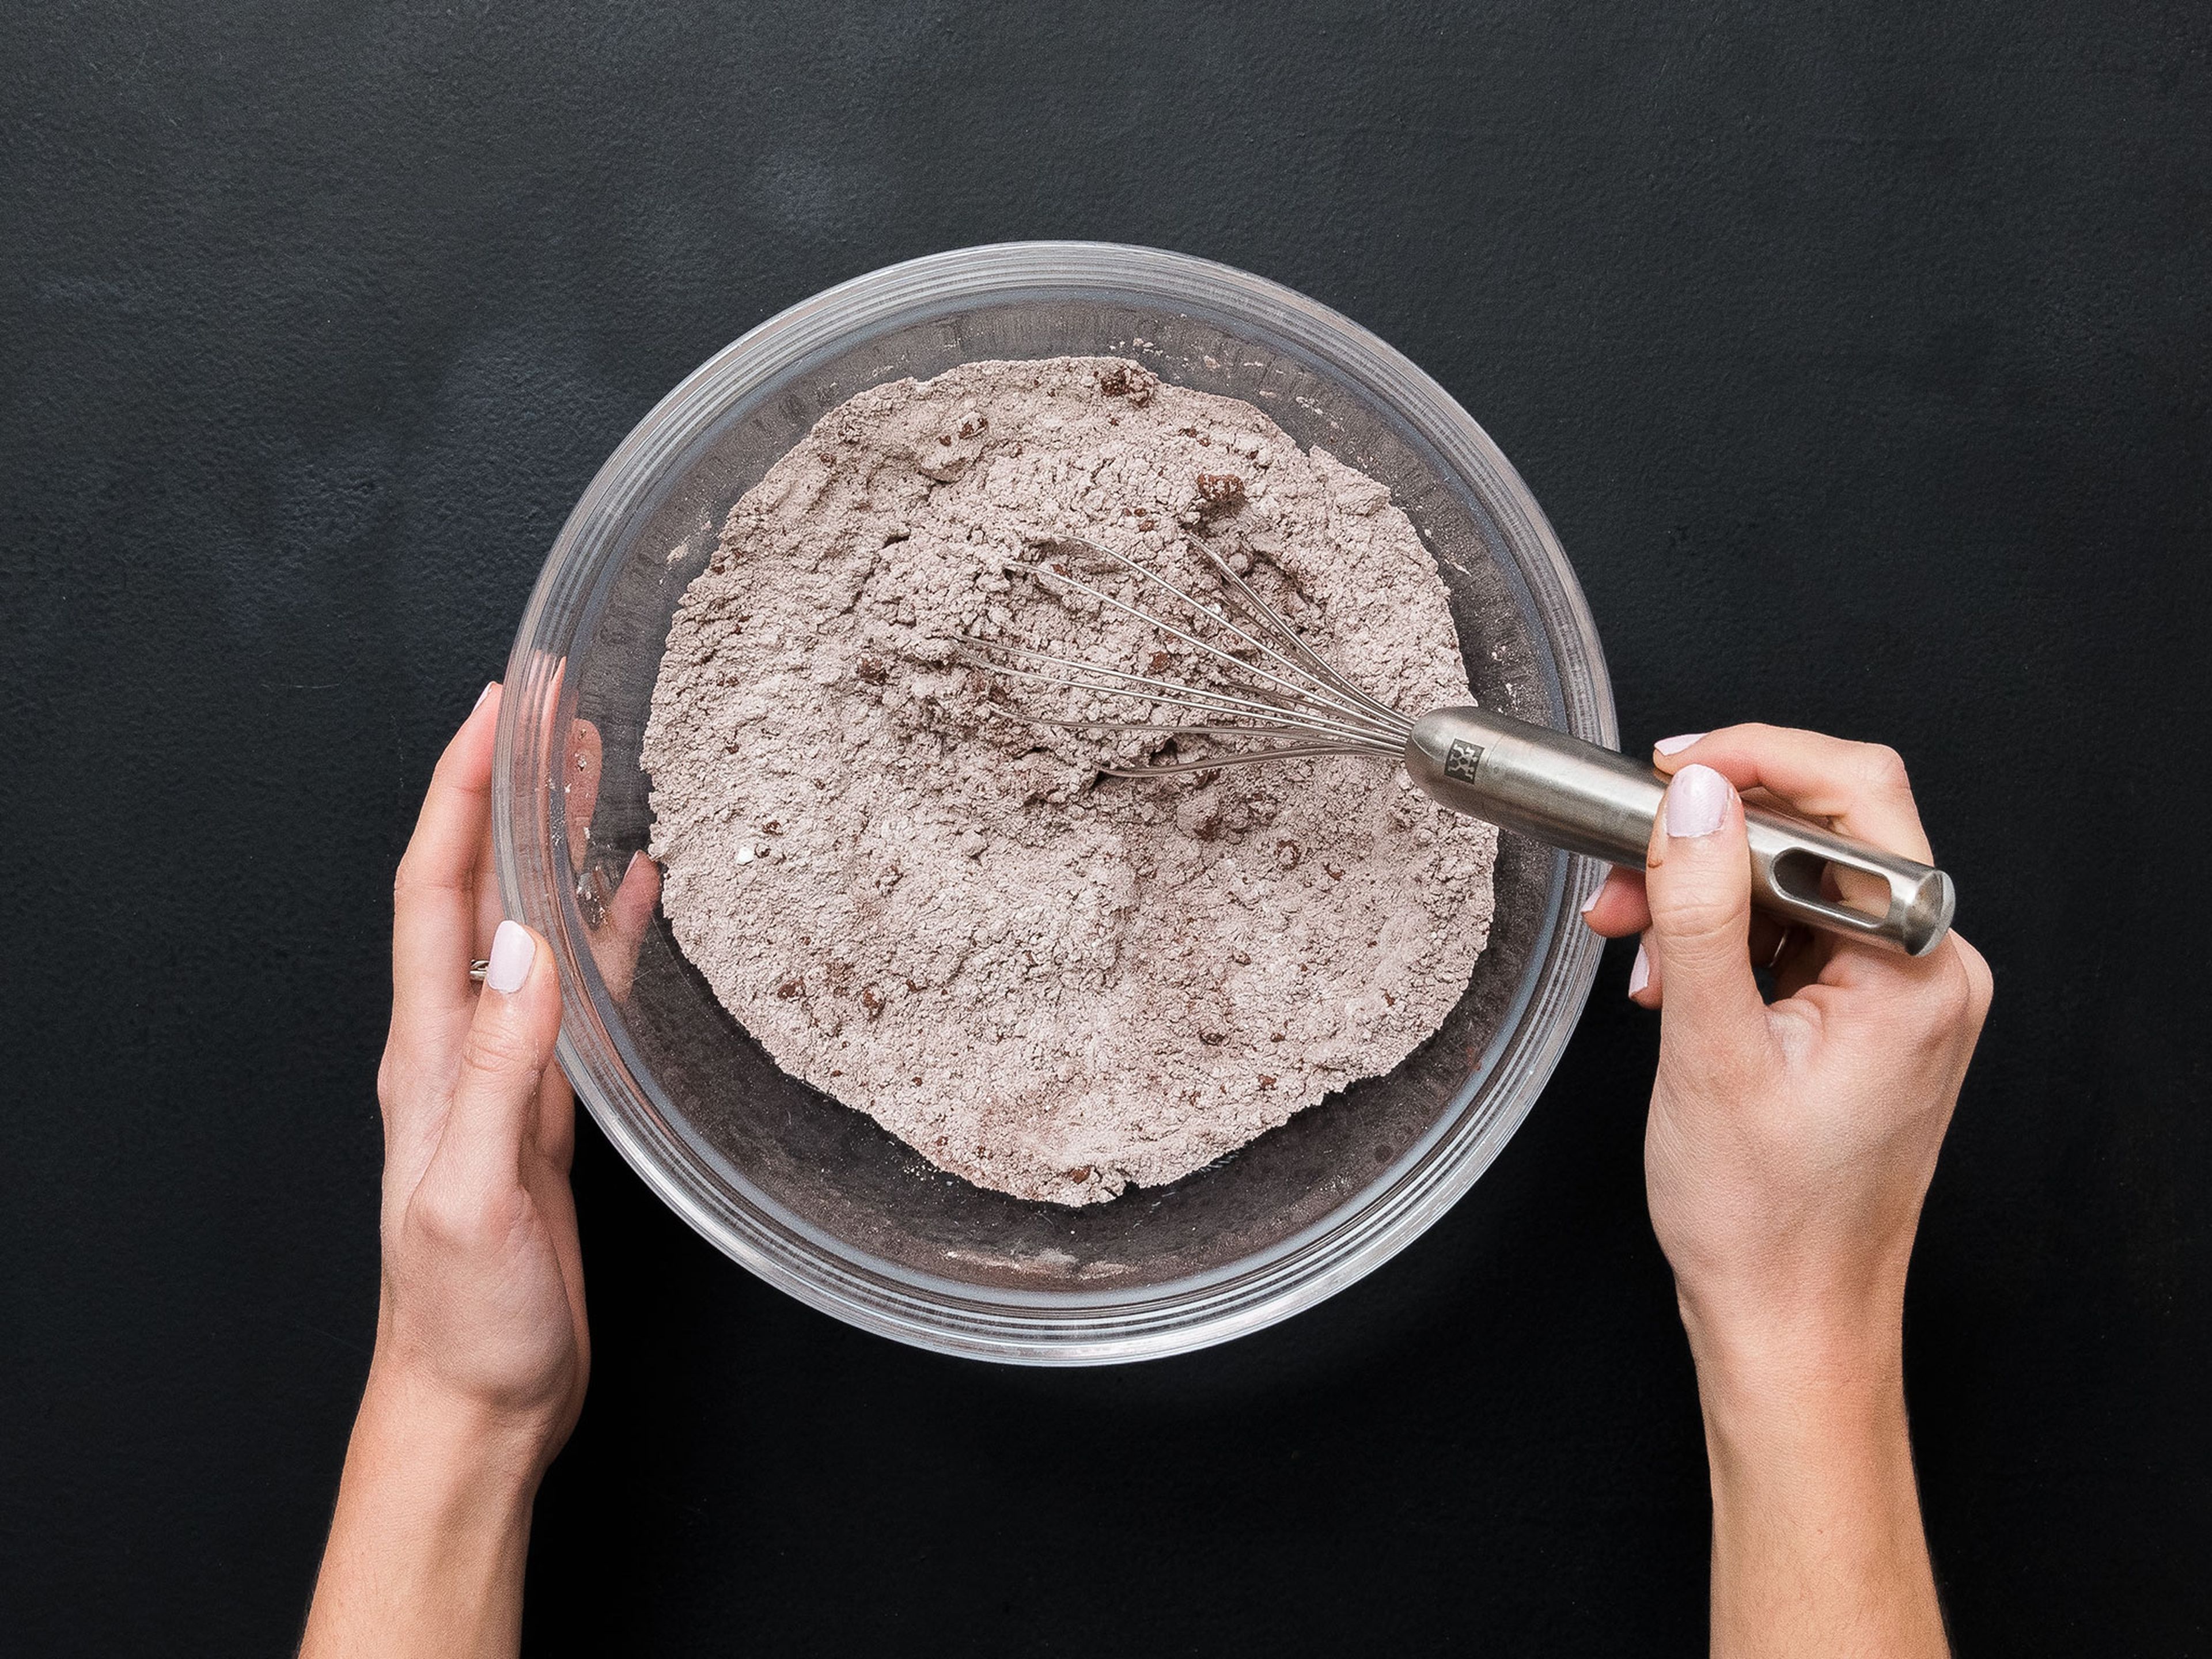 Add flour, cocoa powder, baking powder, and salt to a bowl and stir to combine.